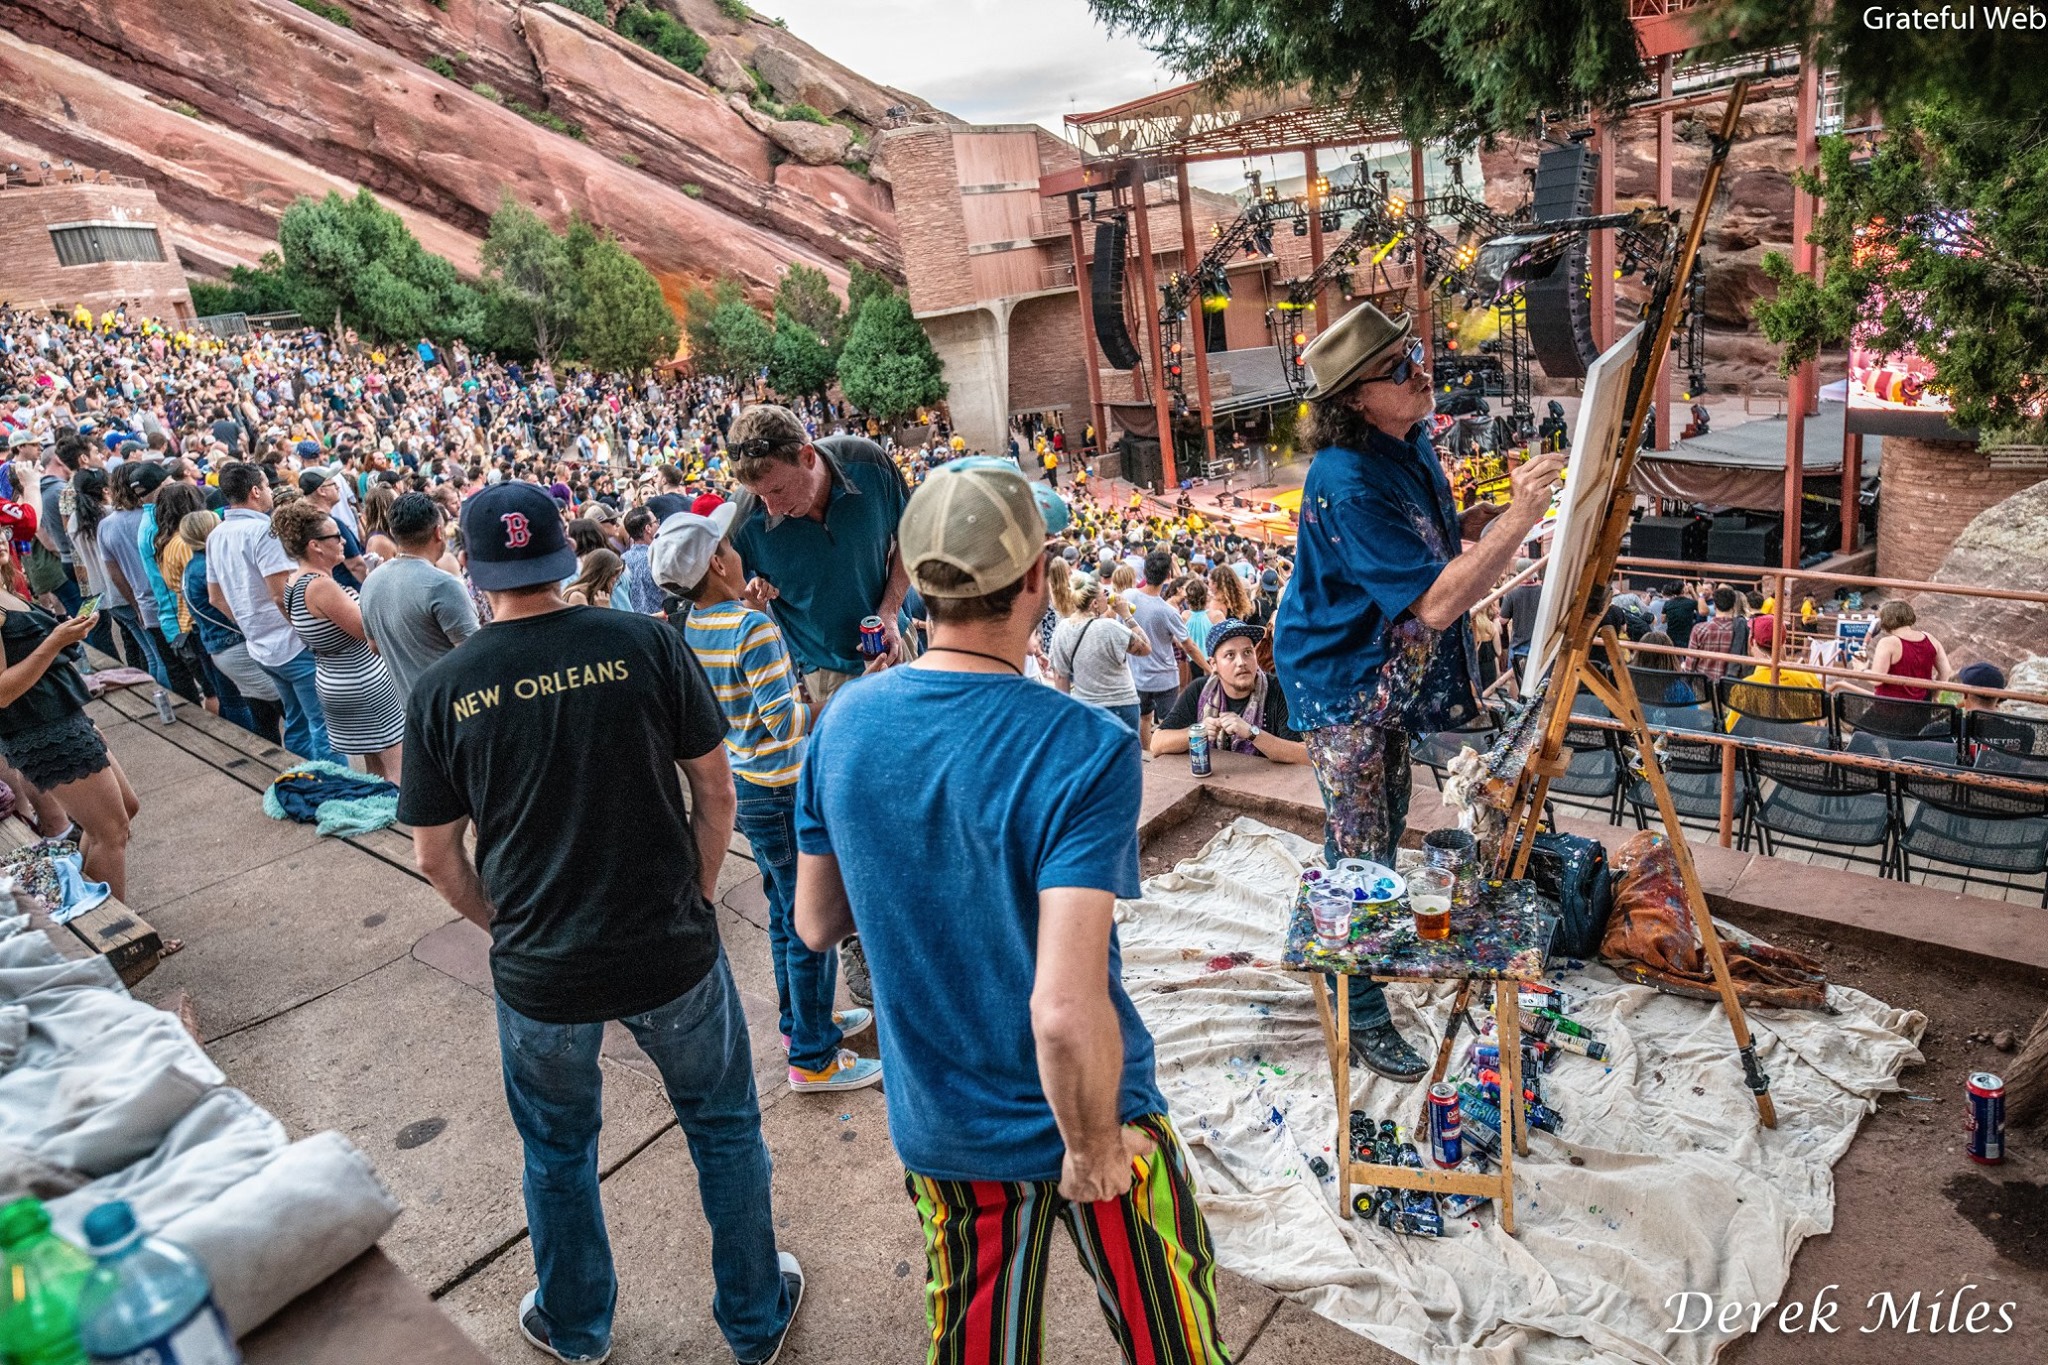 Scramble Campbell doing his thing @ Red Rocks